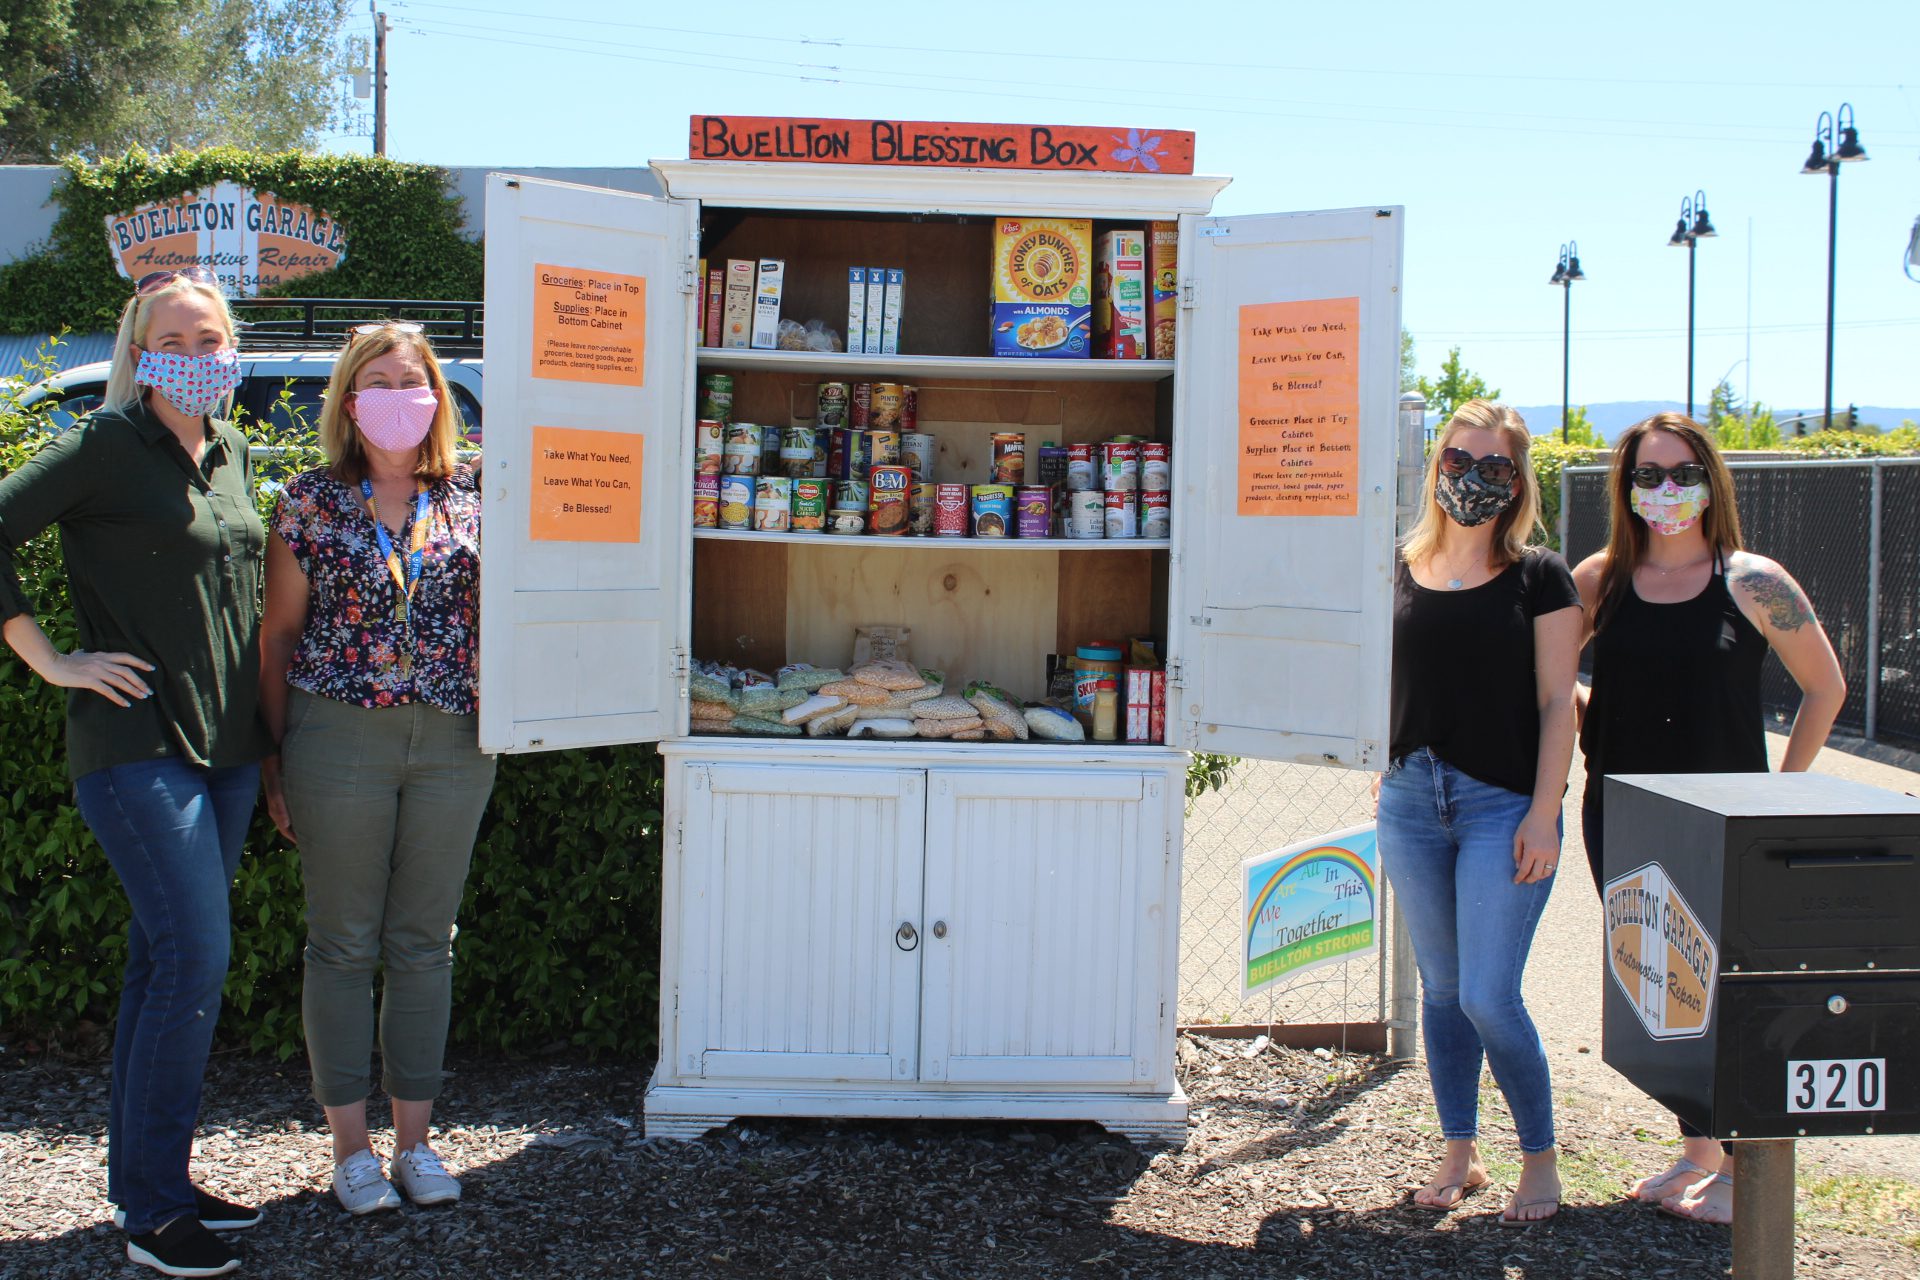 Blessing Box provides essential items, neighborly help